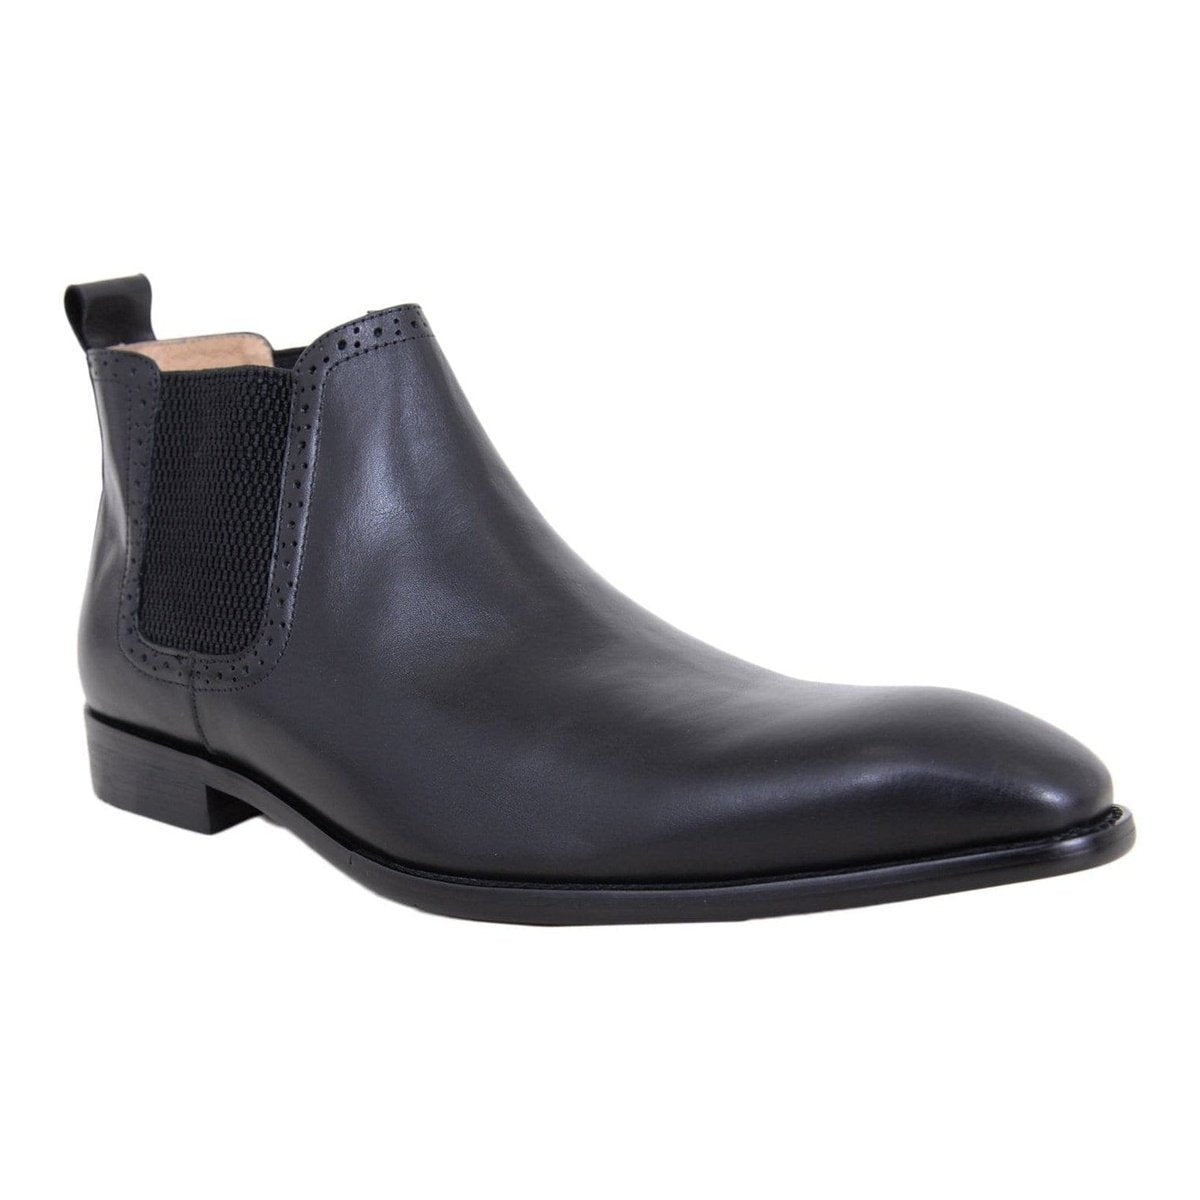 Carrucci Shoes For Amazon 9 D-M Carrucci Solid Black Slip On Leather Ankle Chelsea Dress Boots